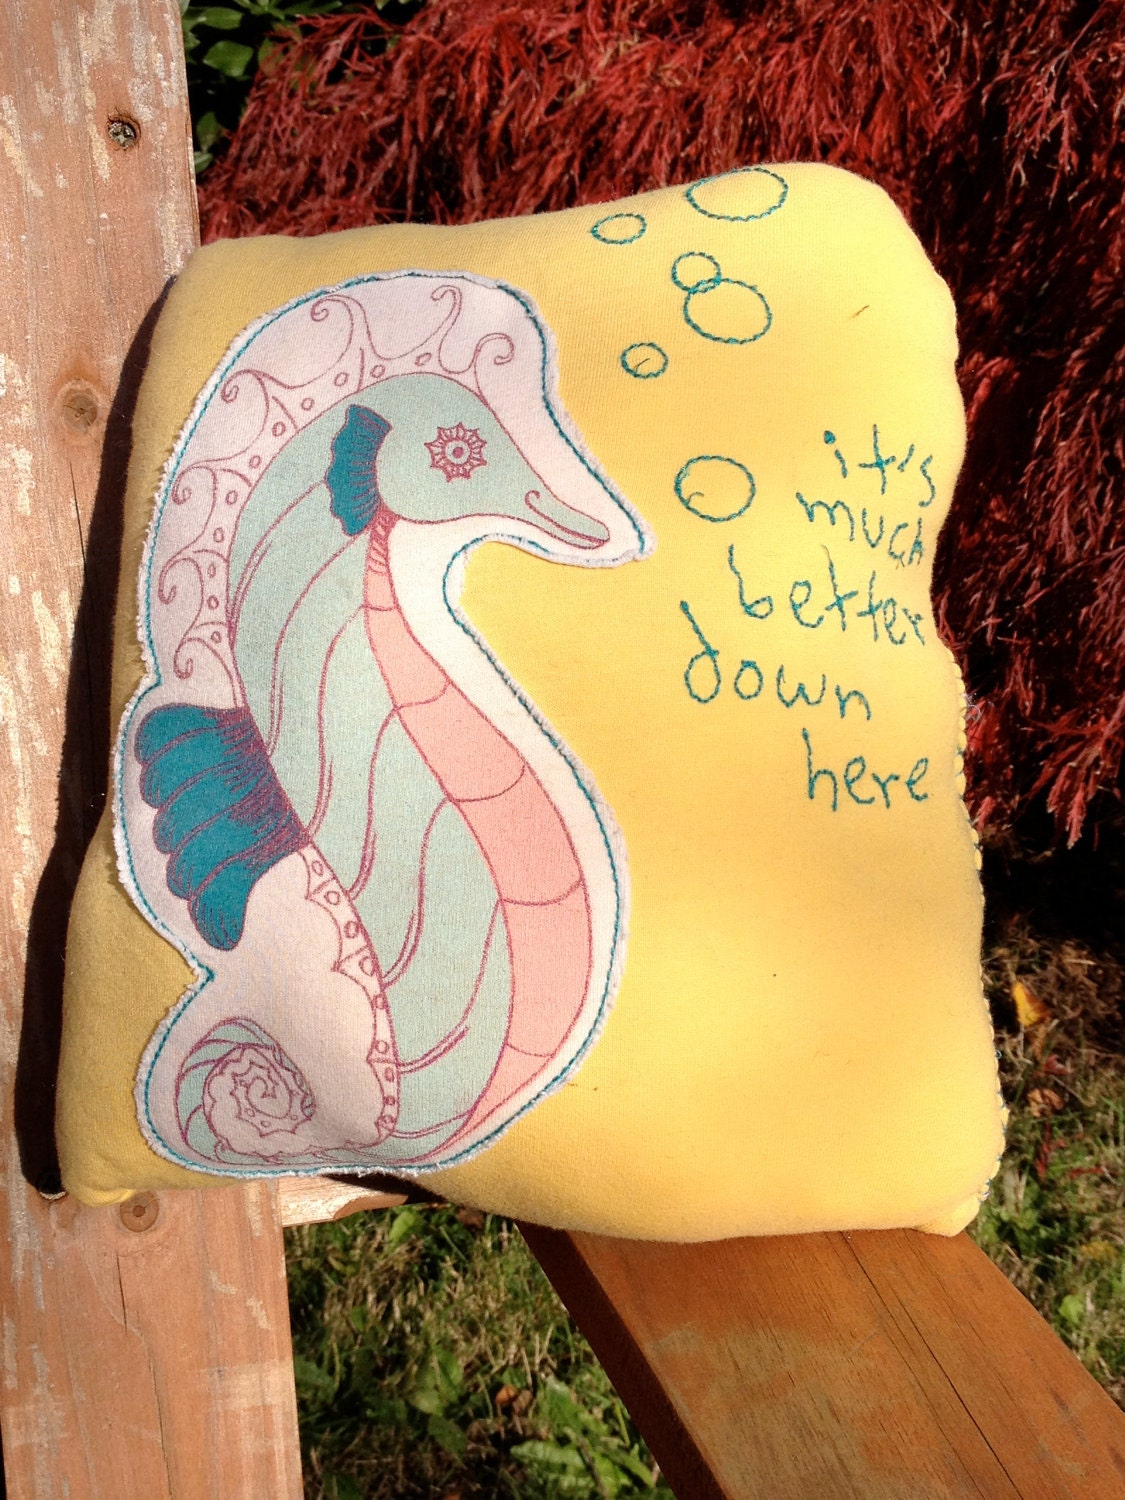 Upcycled ecofriendly seahorse "it's much better down here" t-shirt pillow in yellow